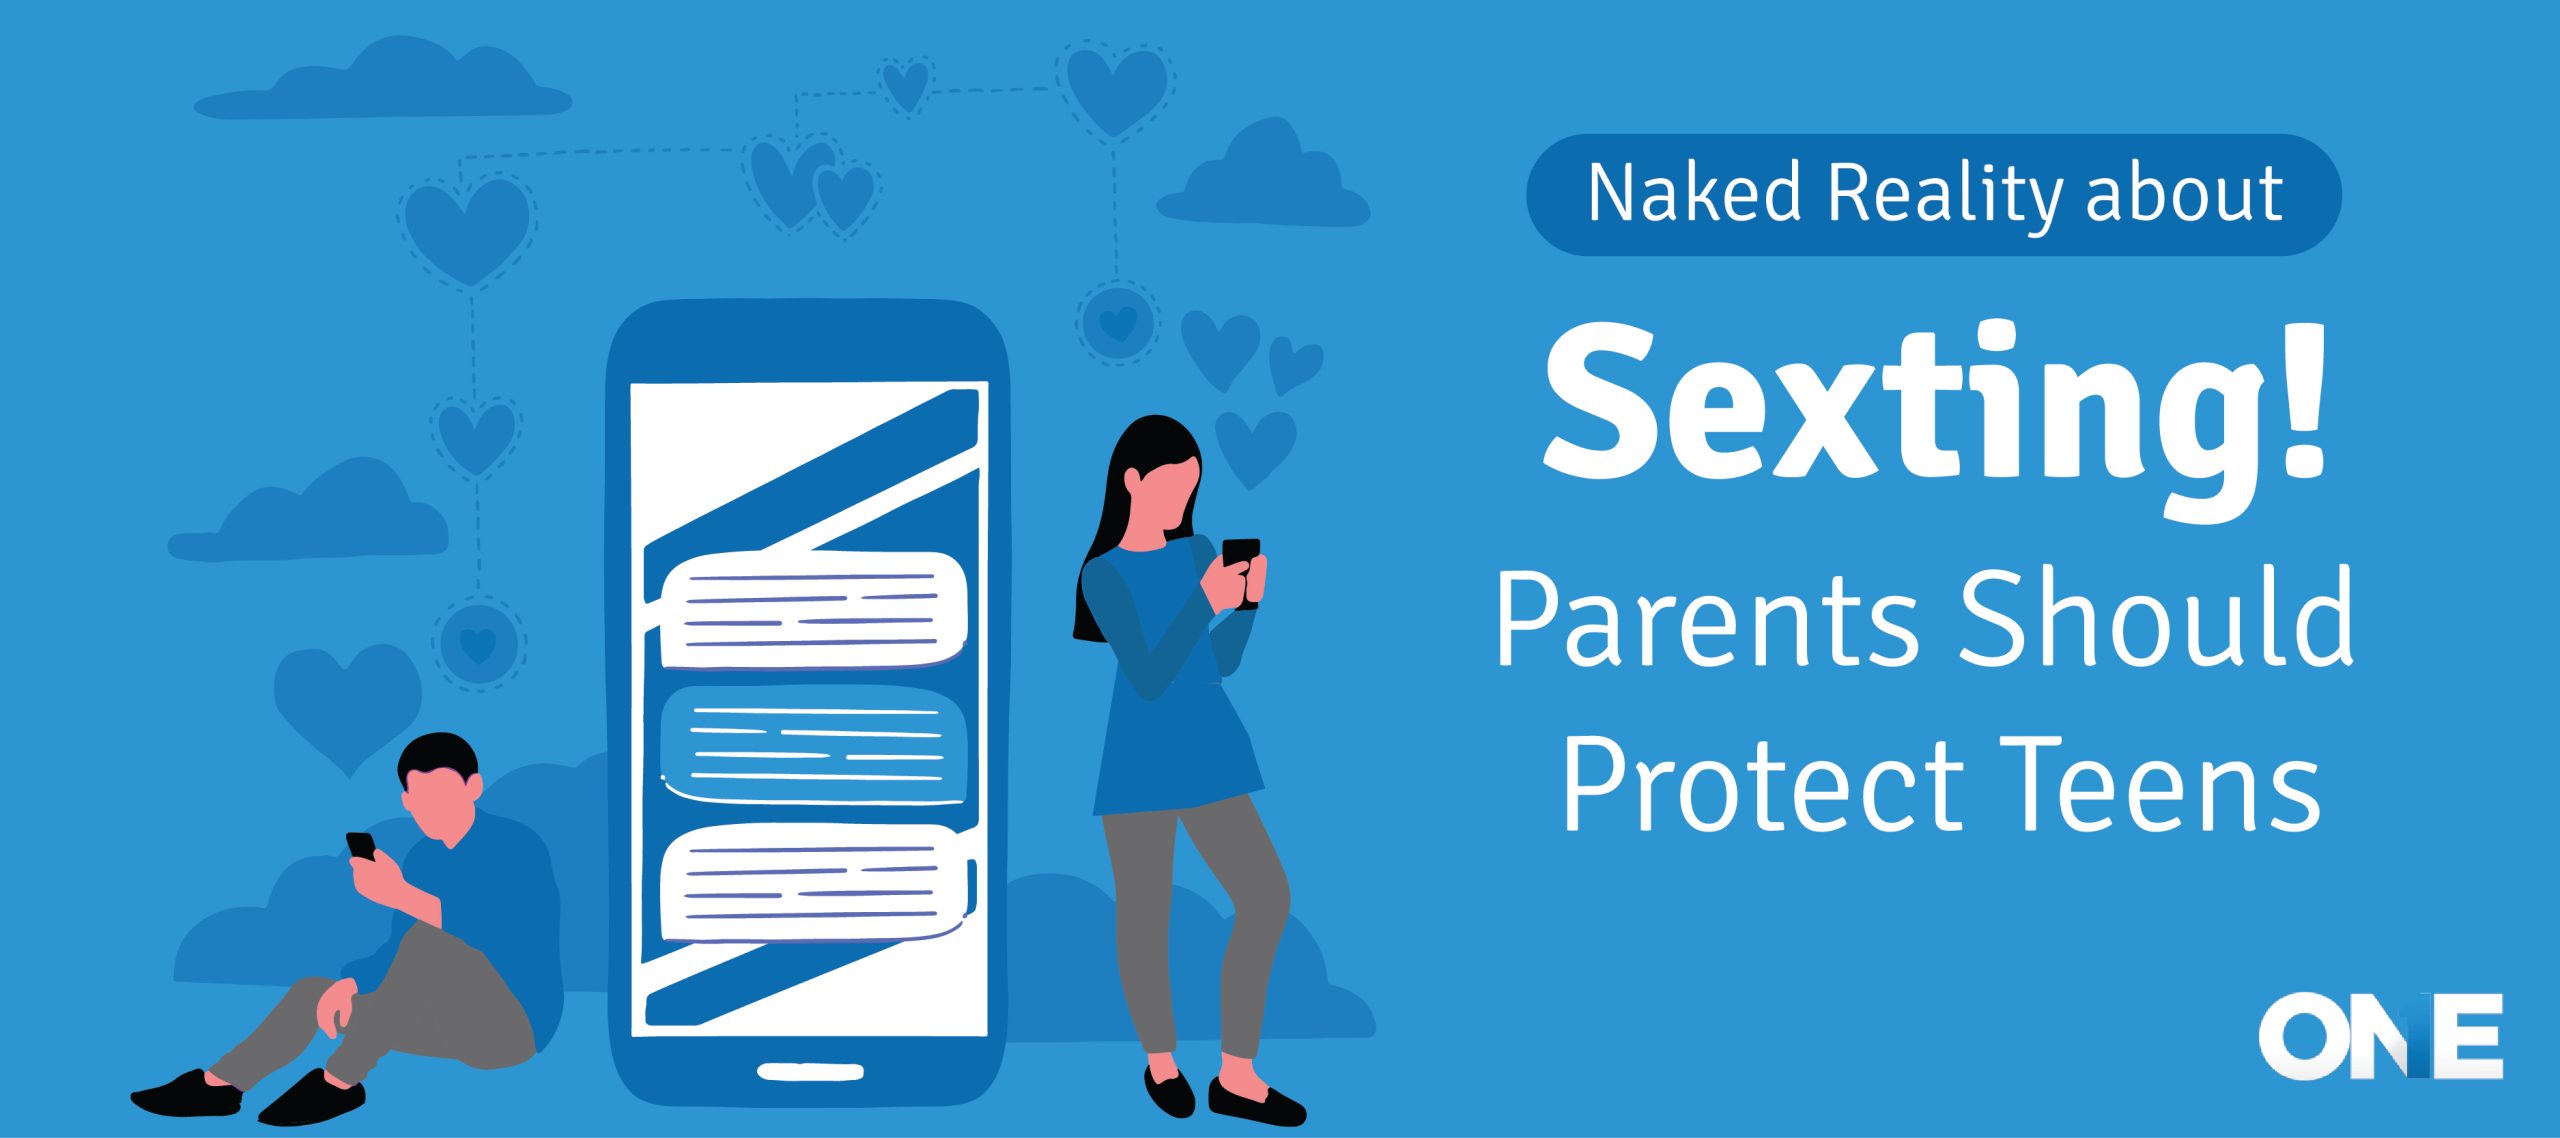 Naked Reality about Sexting! Parents Should Protect Teens